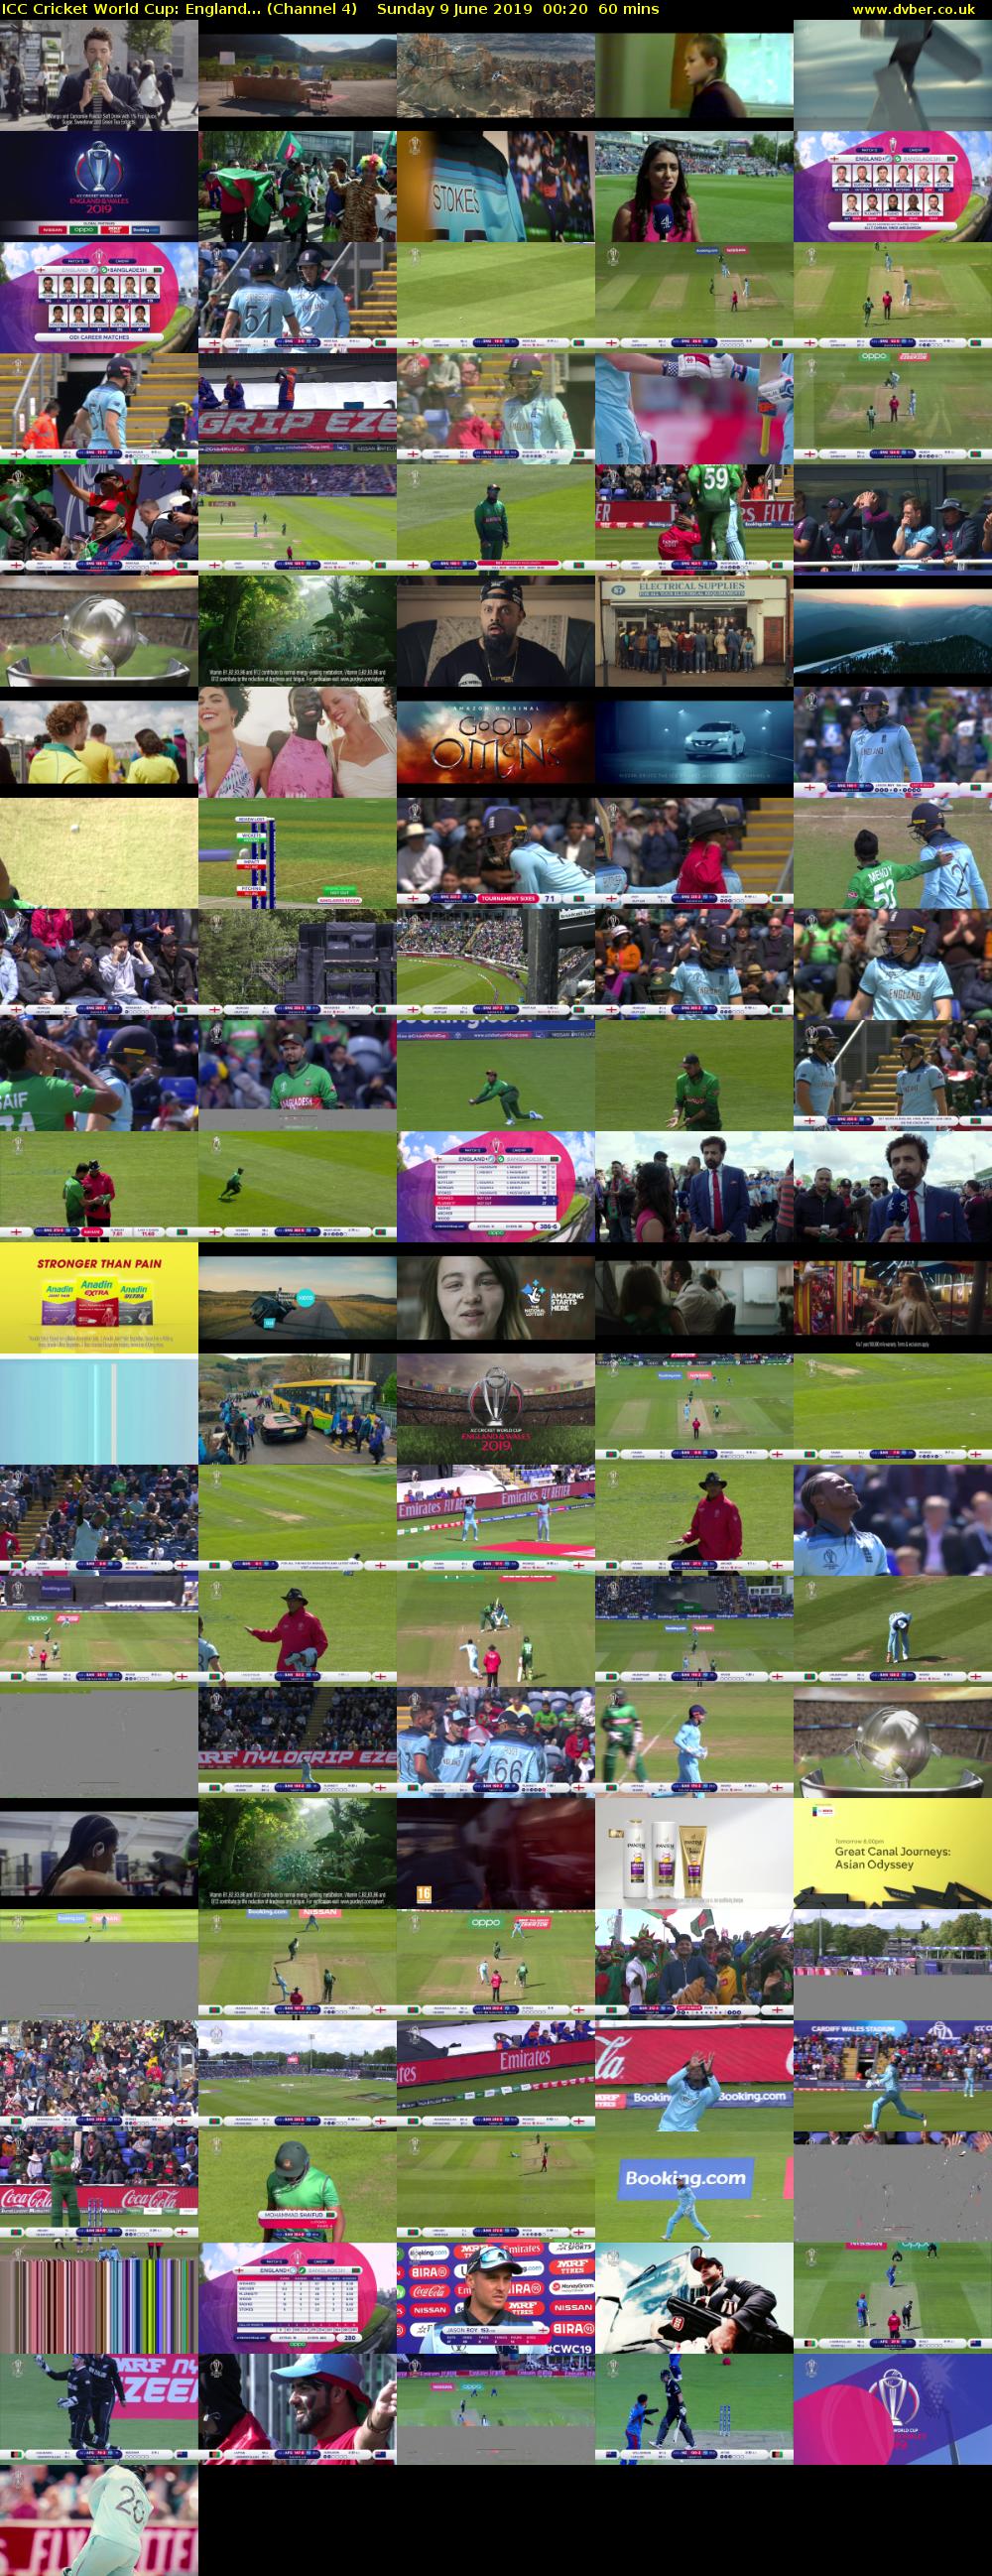 ICC Cricket World Cup: England... (Channel 4) Sunday 9 June 2019 00:20 - 01:20